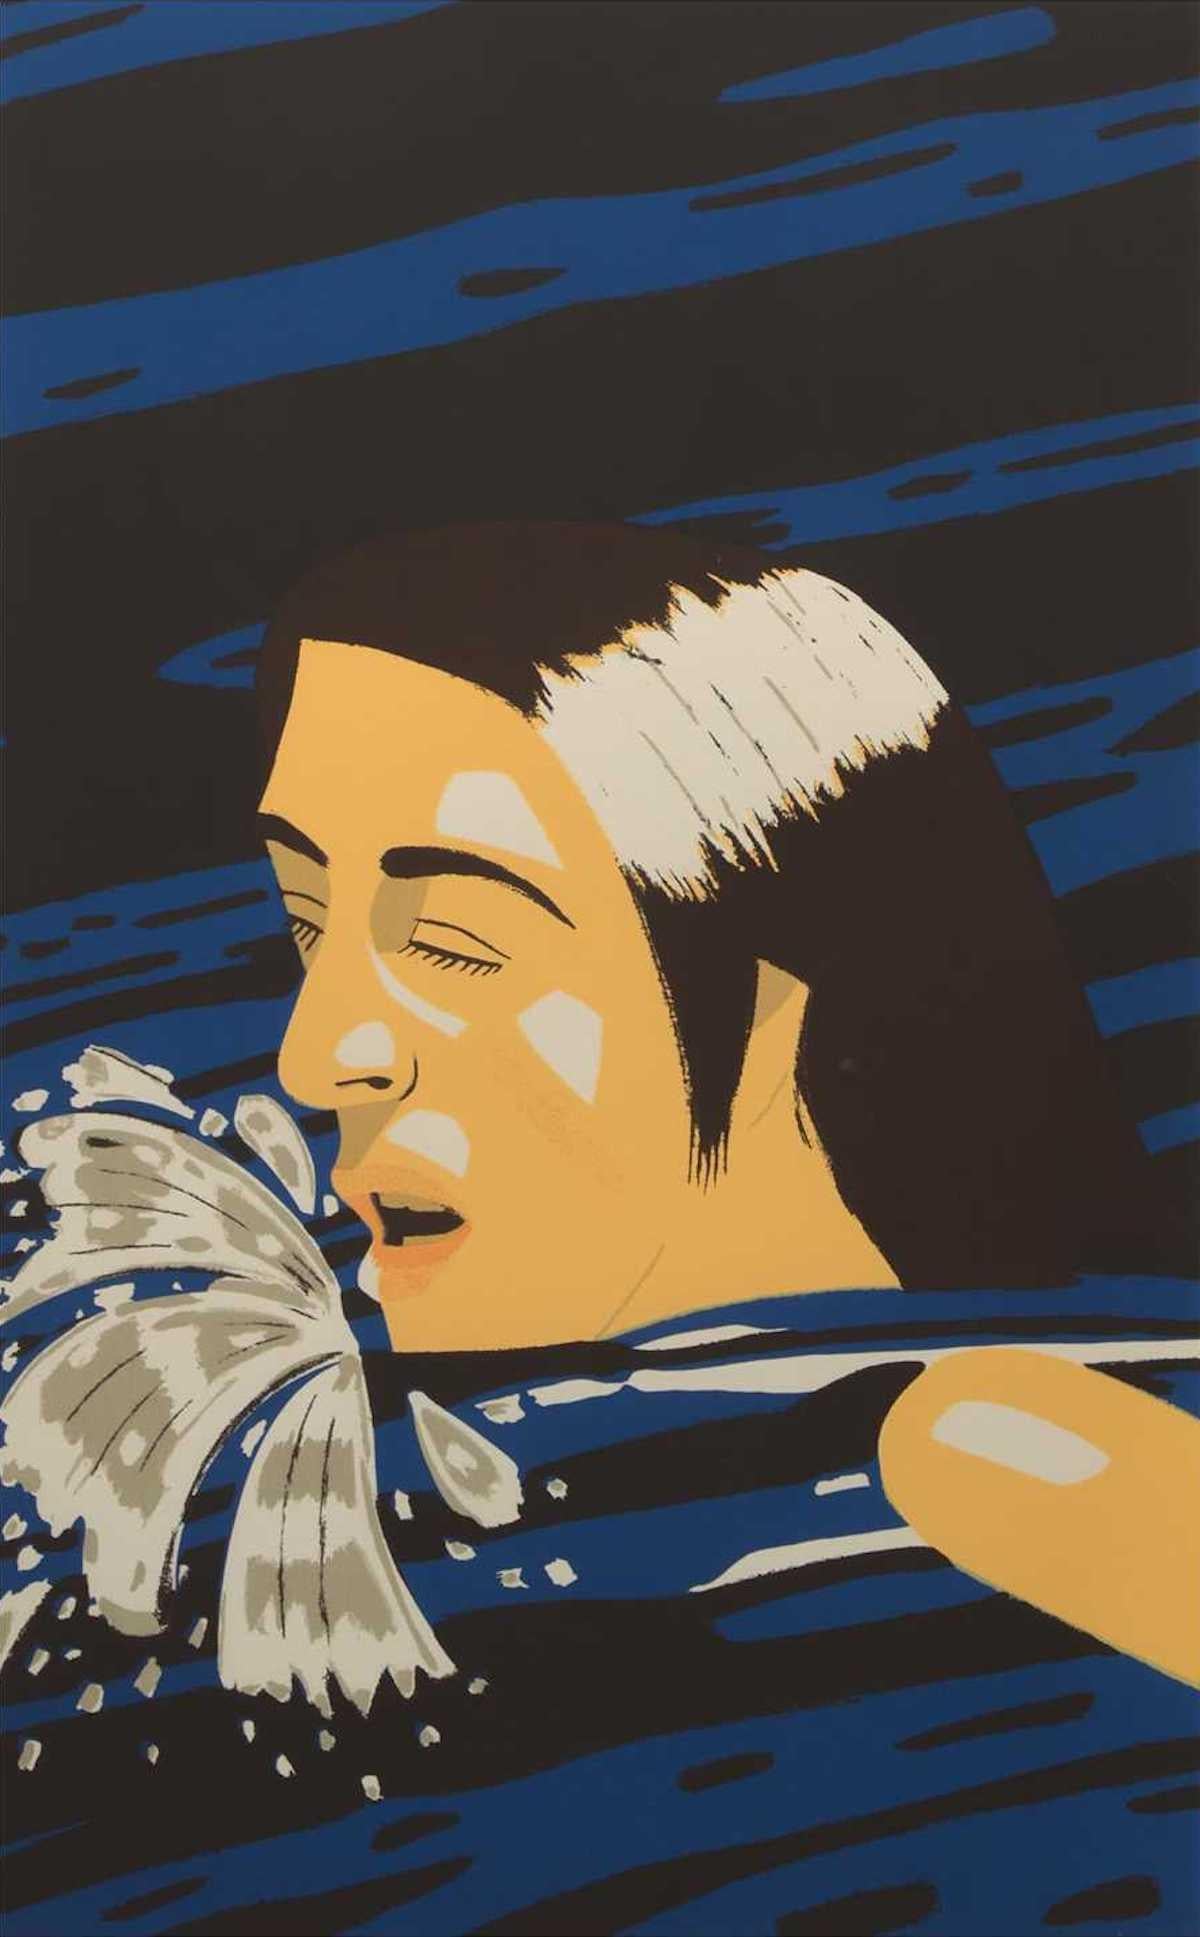 ALEX KATZ (1927-Present)

This Alex Katz 1976 Screenprint 'Olympic Swimmer' is a screenprint in five colors on white Vélin d'Arches paper. It is signed in pencil and numbered 158/200 (there were also 20 artist's proofs and 3 printer's proofs)